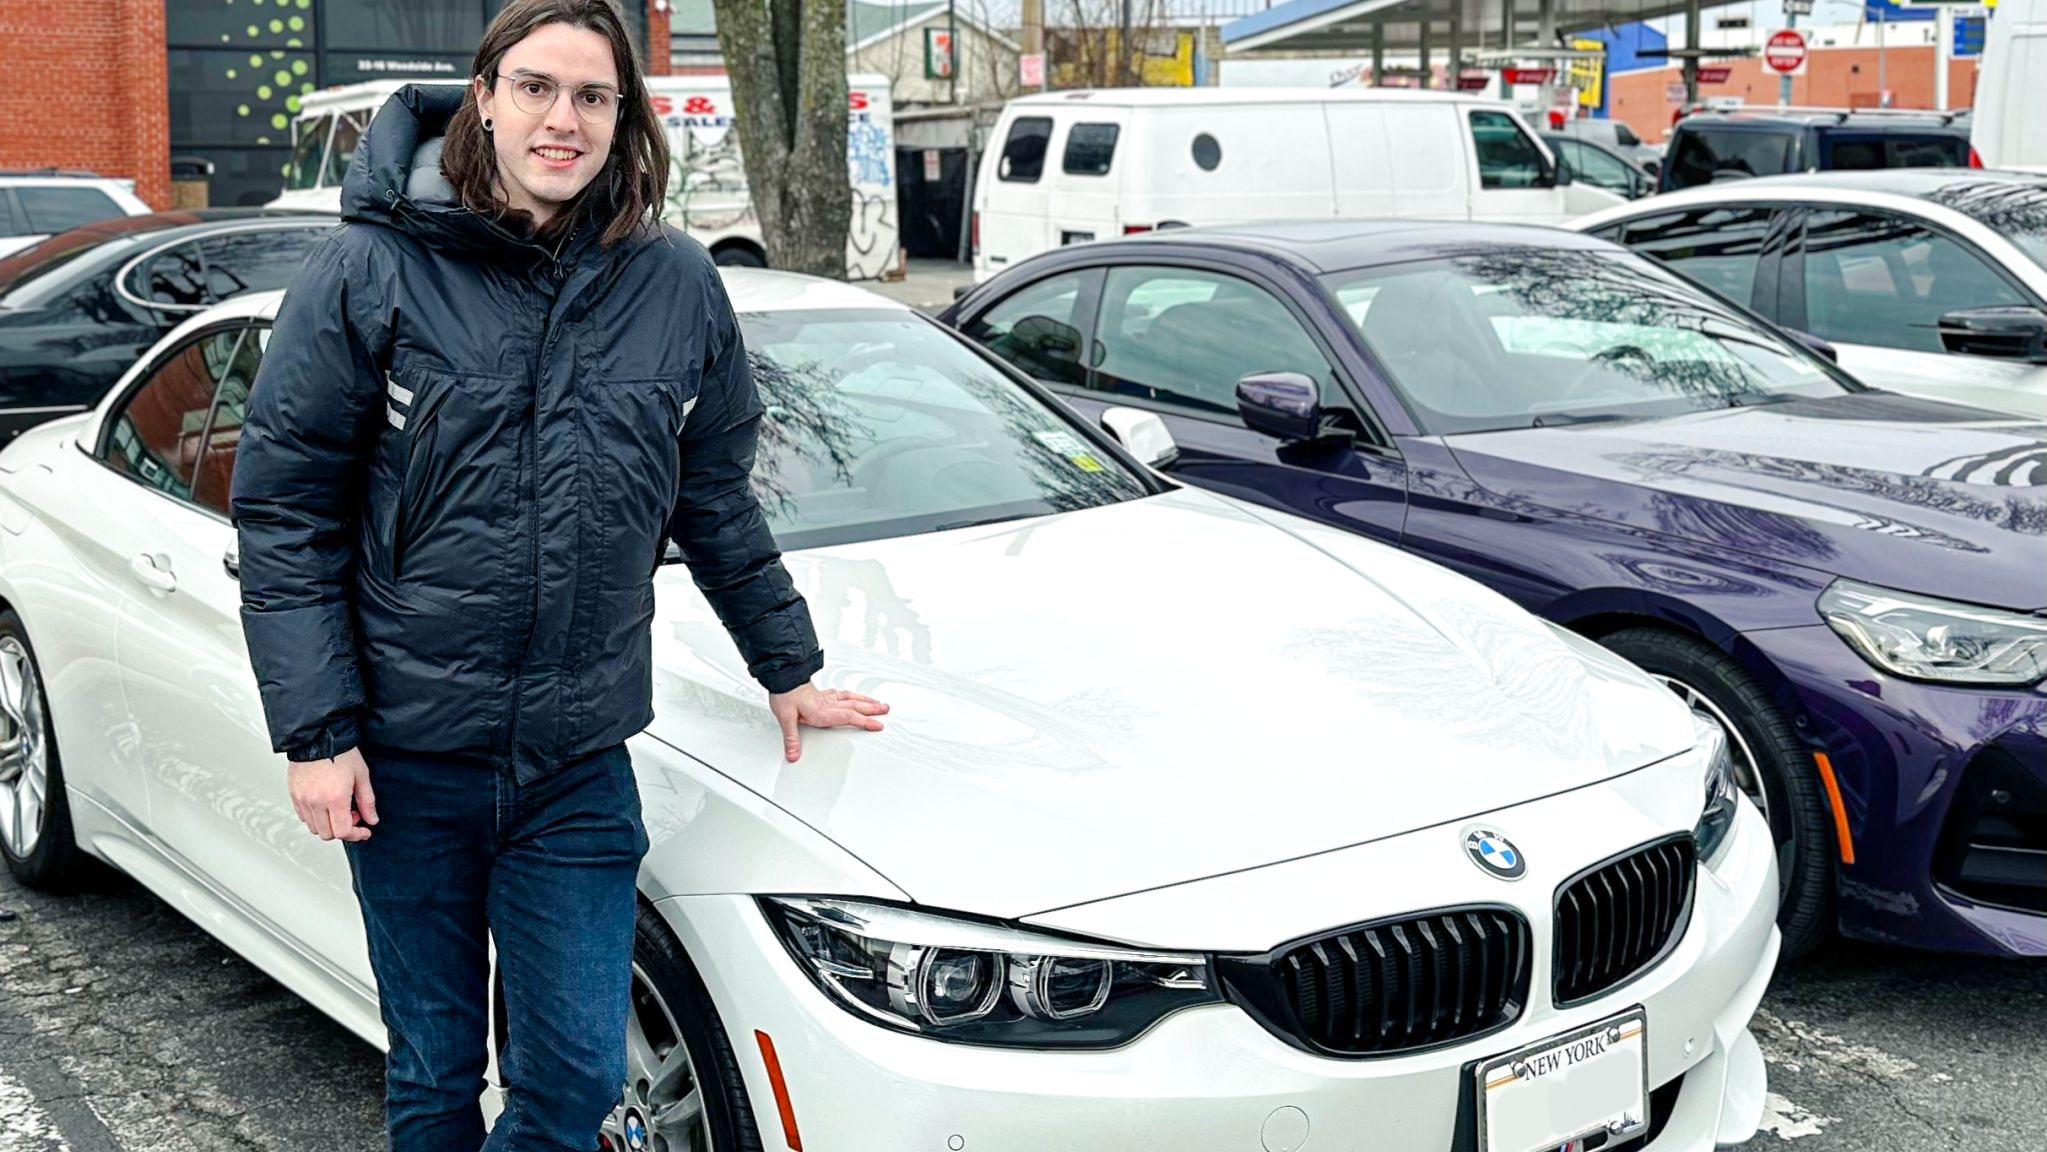 Acceleramota founder and NYCars & Coffee organizer Gabe Carey standing next to white 2018 BMW 430i with hand on hood